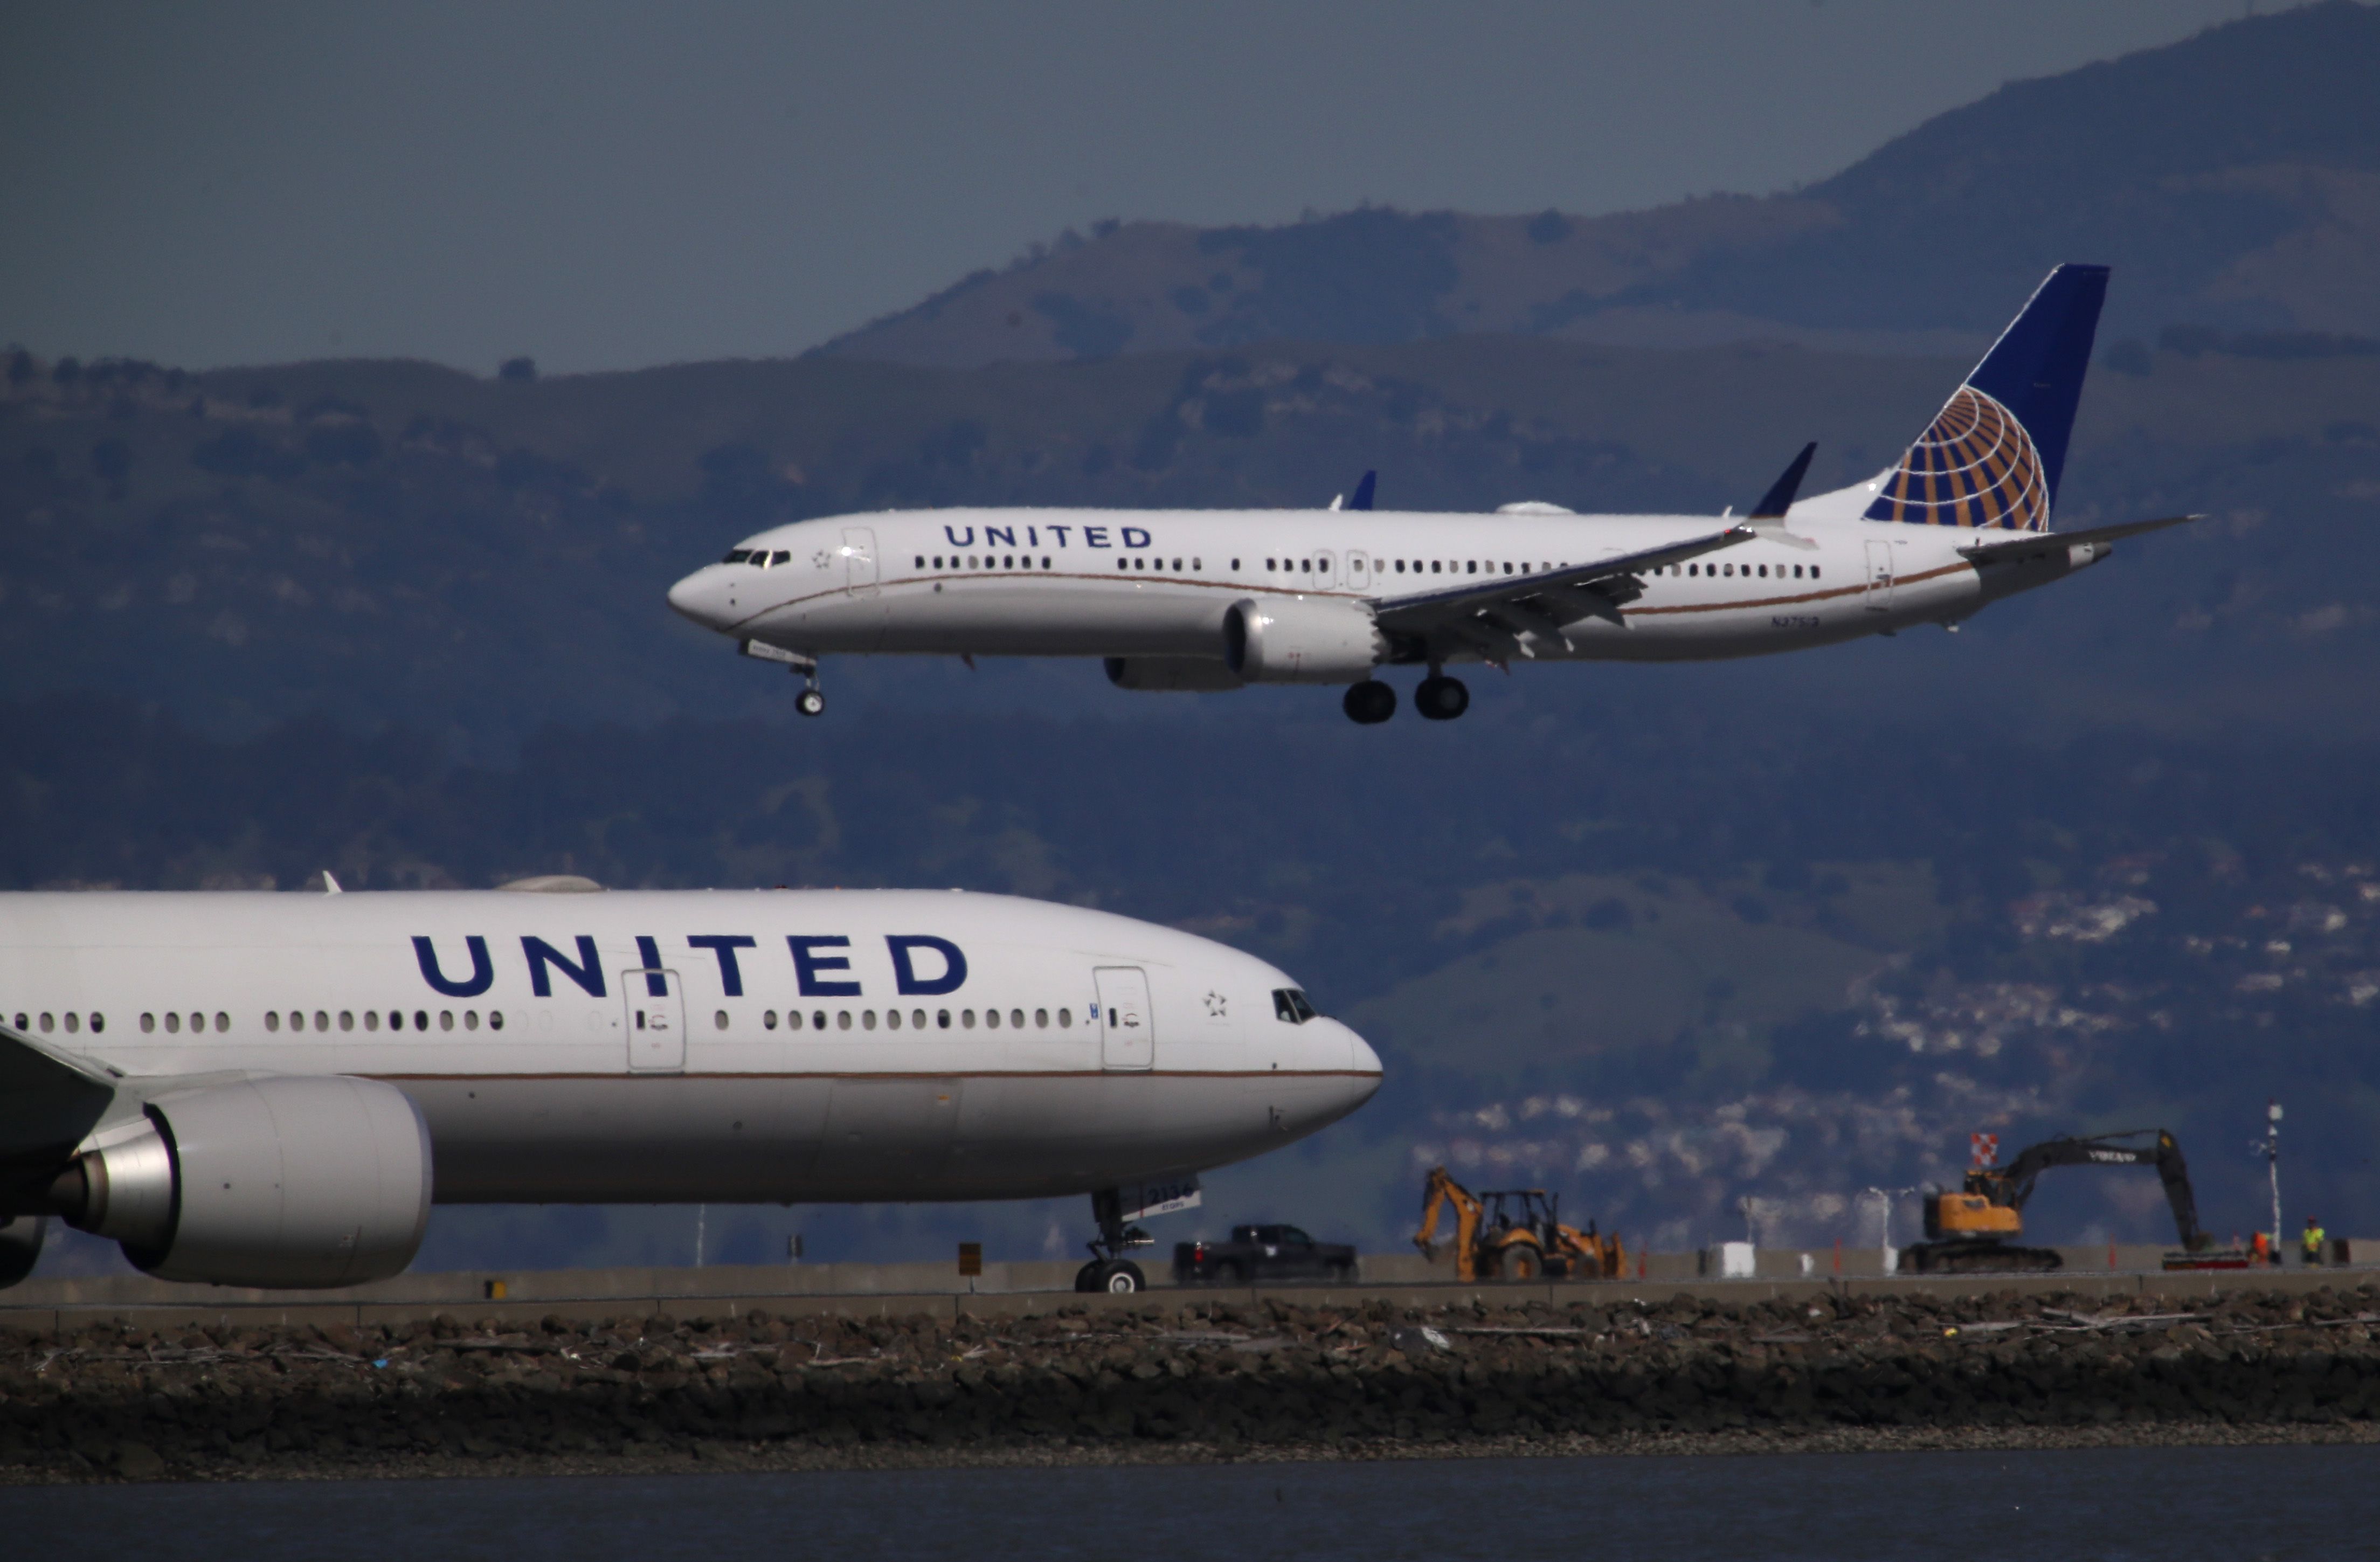 United Airlines Q2 2019 earnings beat Wall Street estimates